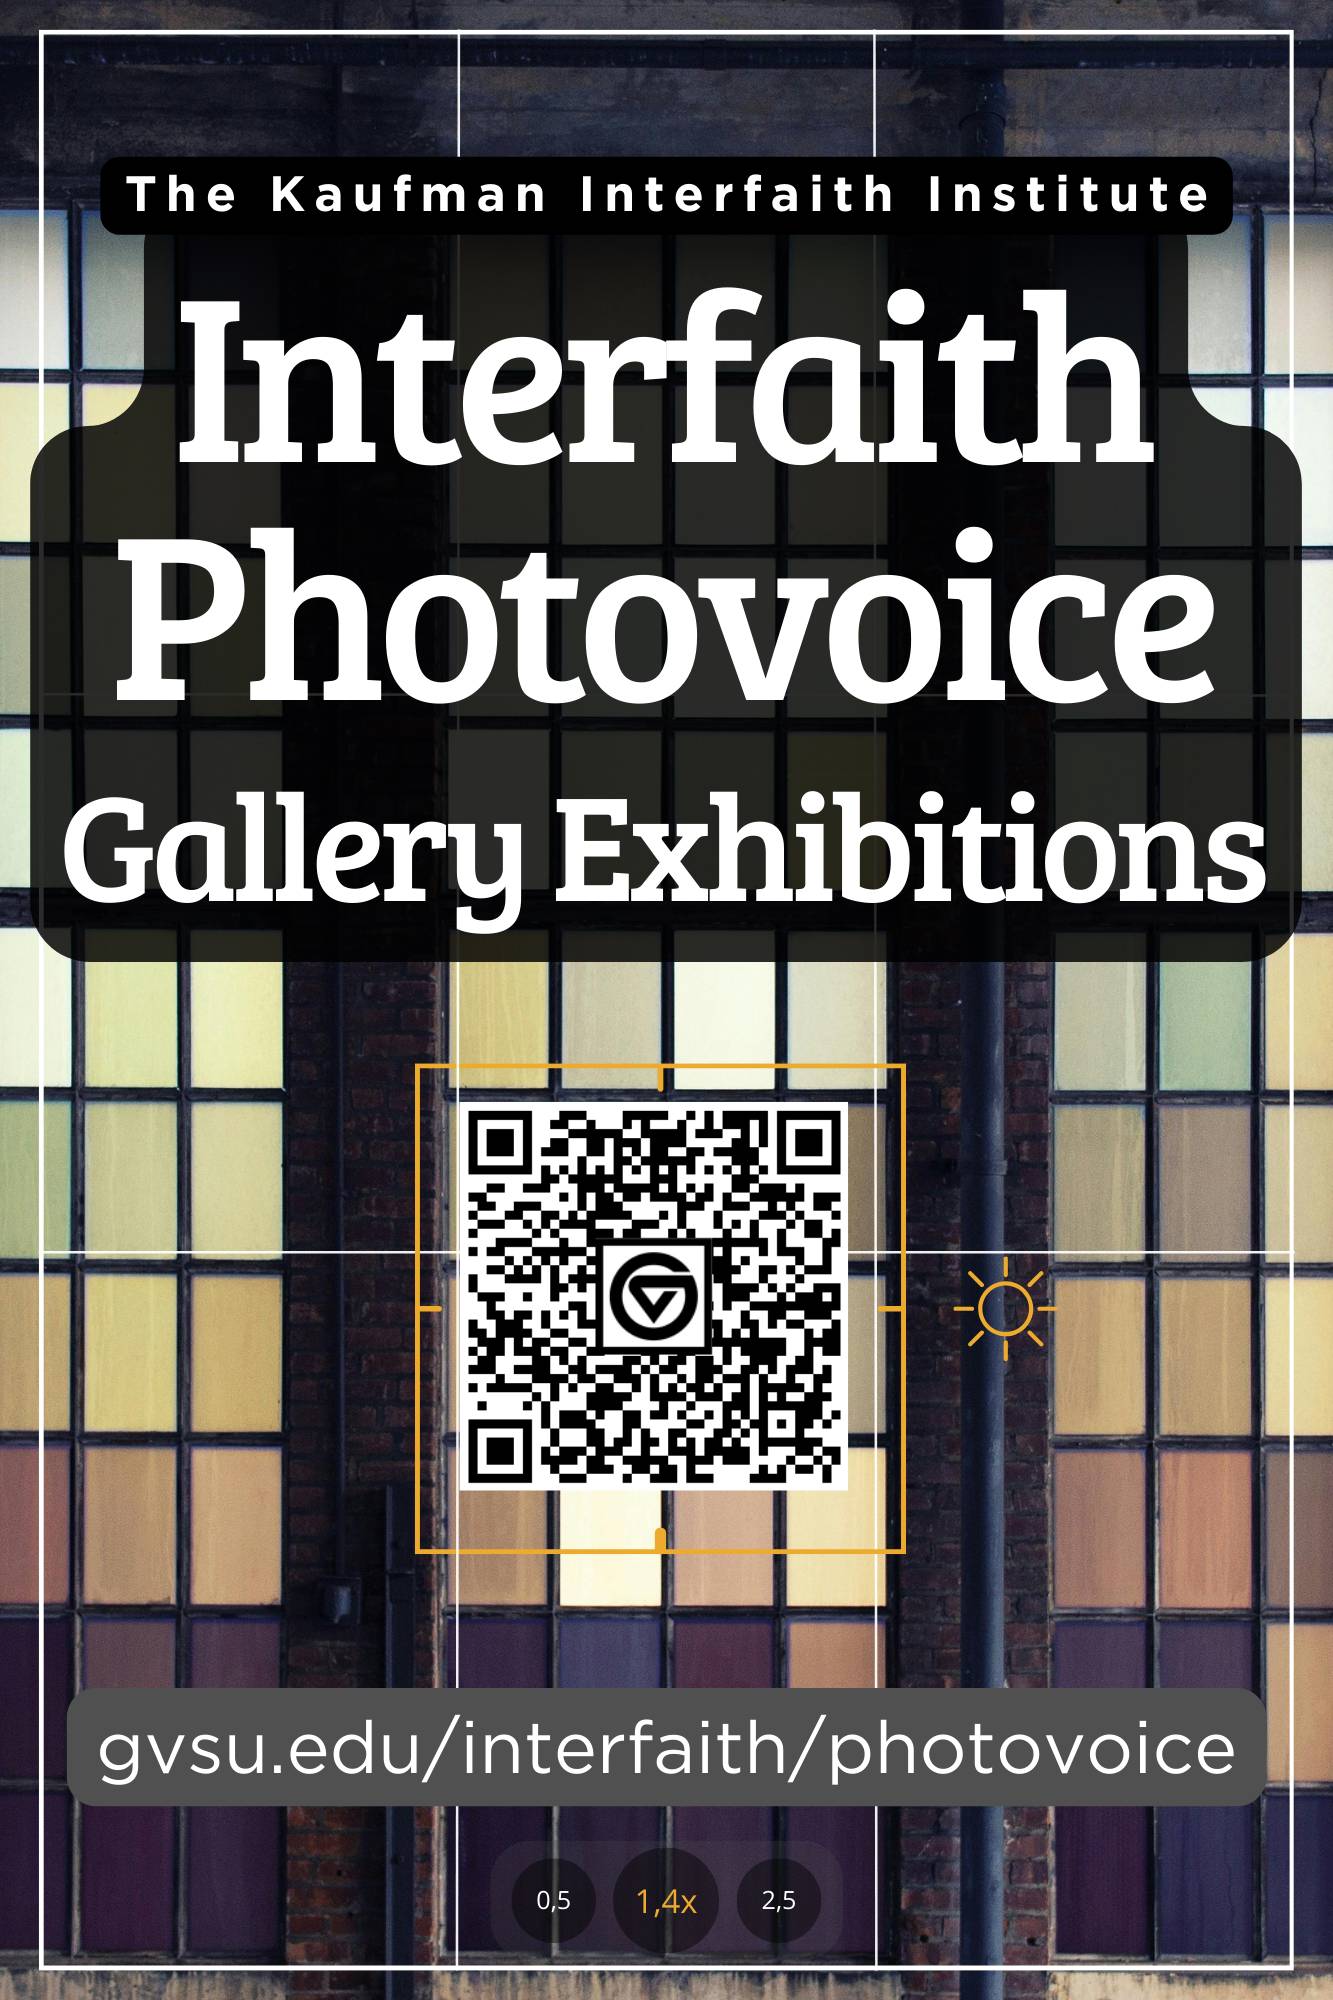 Interfaith Photovoice exhibitions coming up - click for more information.